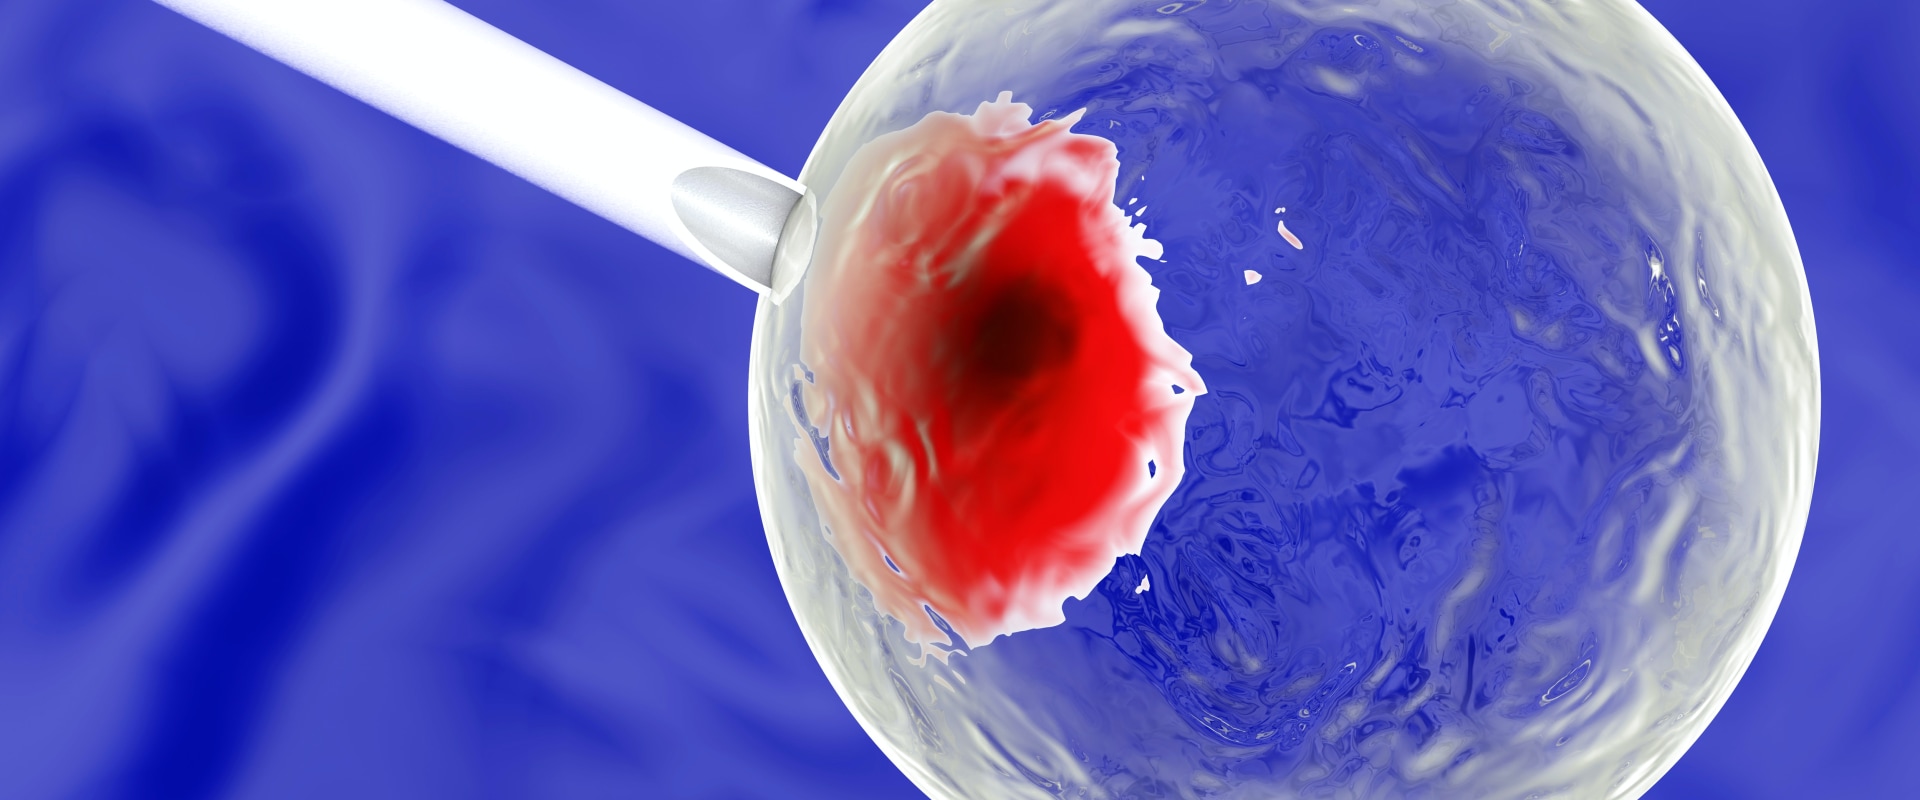 Are stem cells a miracle cure?